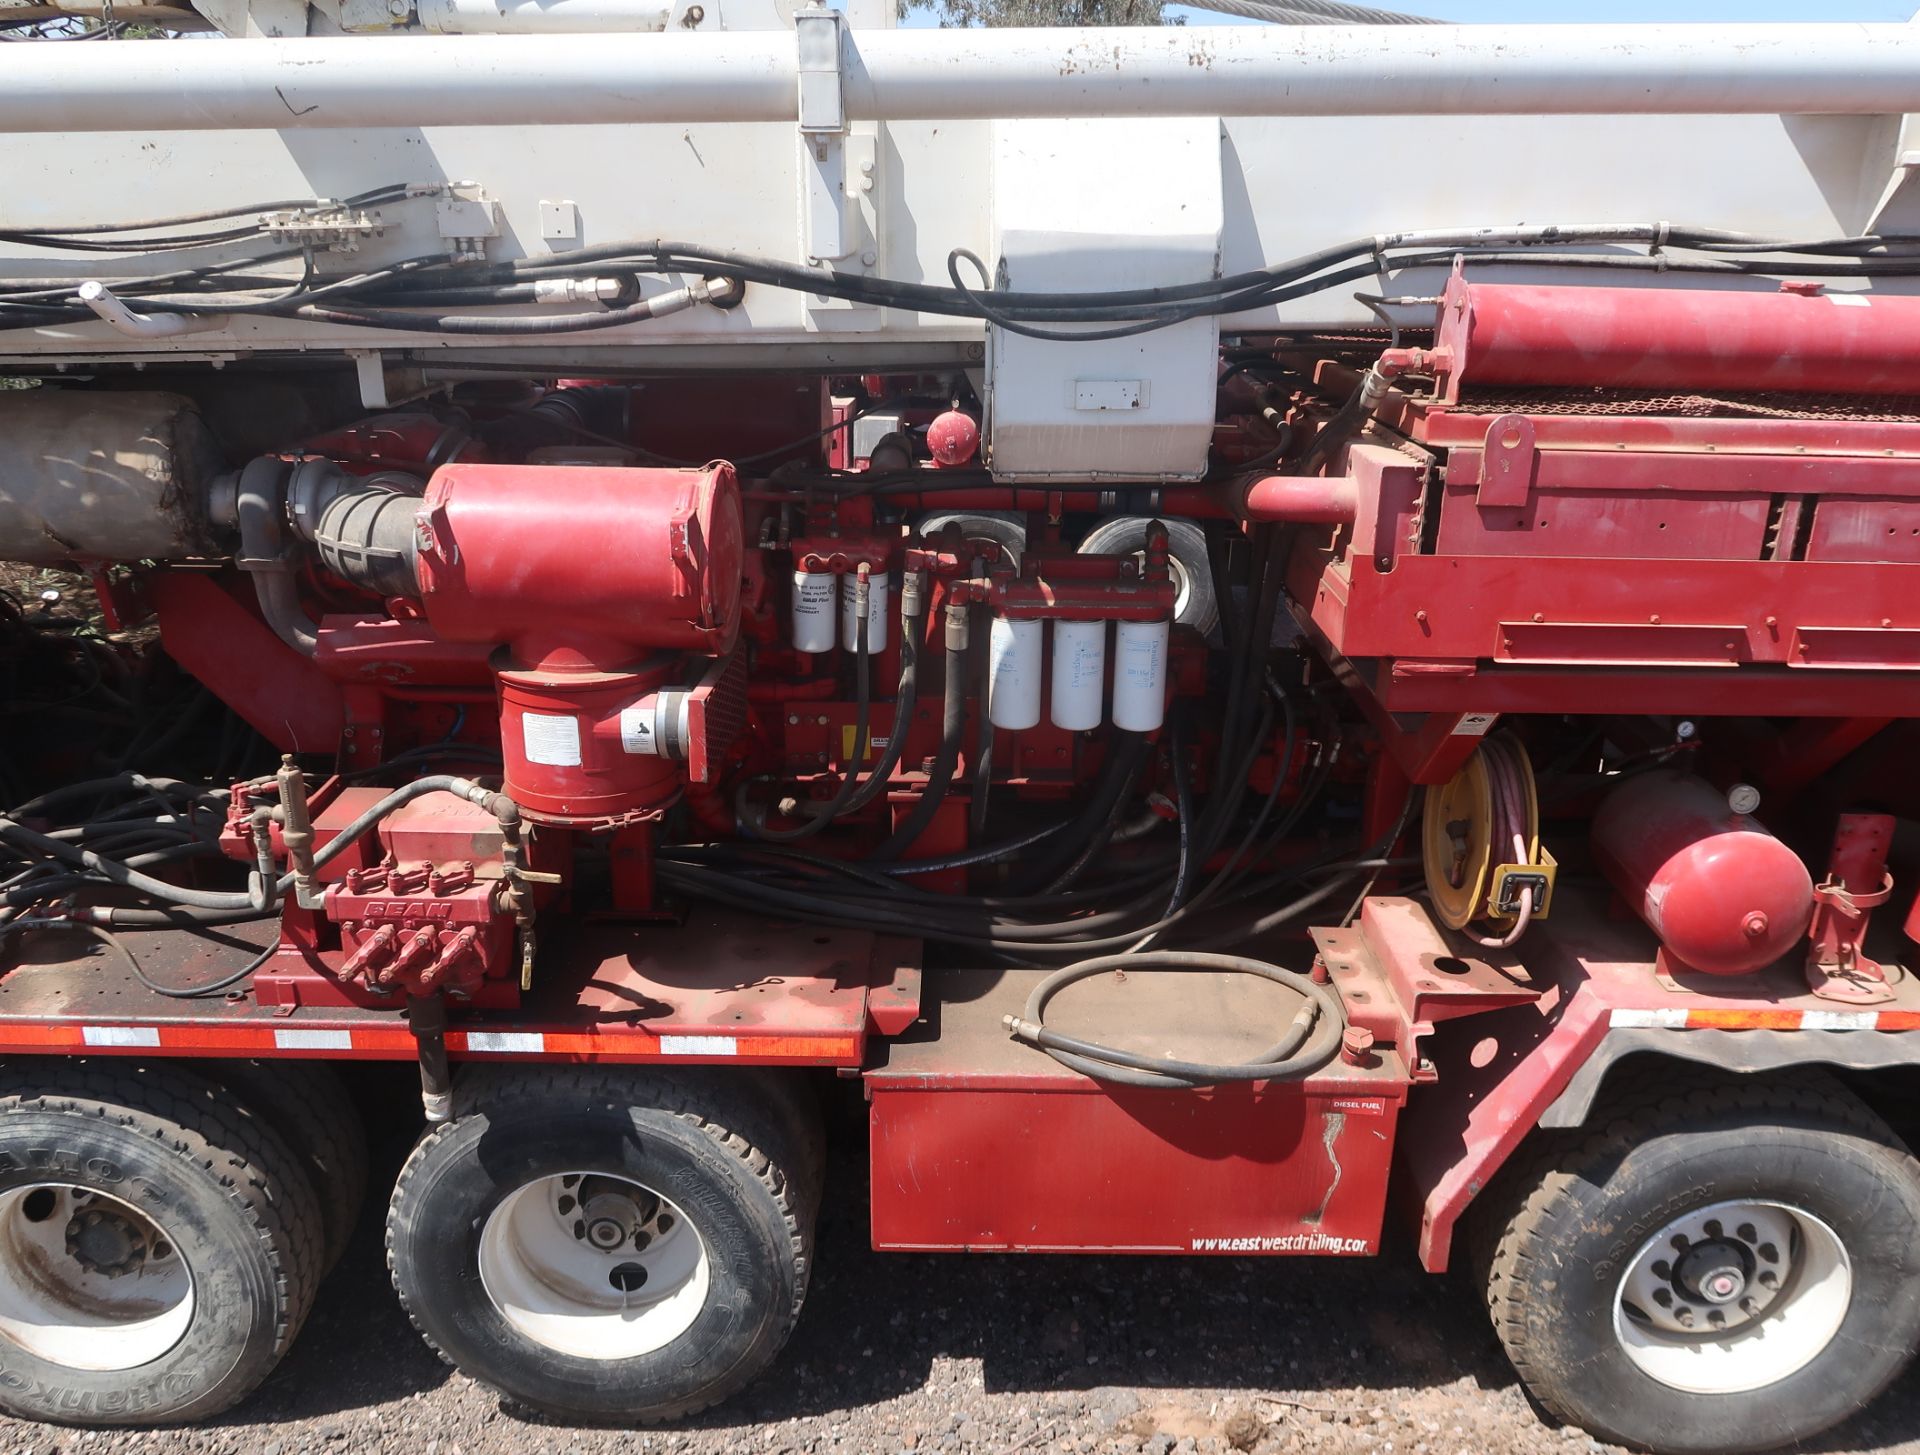 2006 SCHRAMM T-130XD DRILL RIG, SN. J130-0135 MOUNTED ON CRANE CARRIER, VIN. 1CYDGV6846T046987 - Image 13 of 18